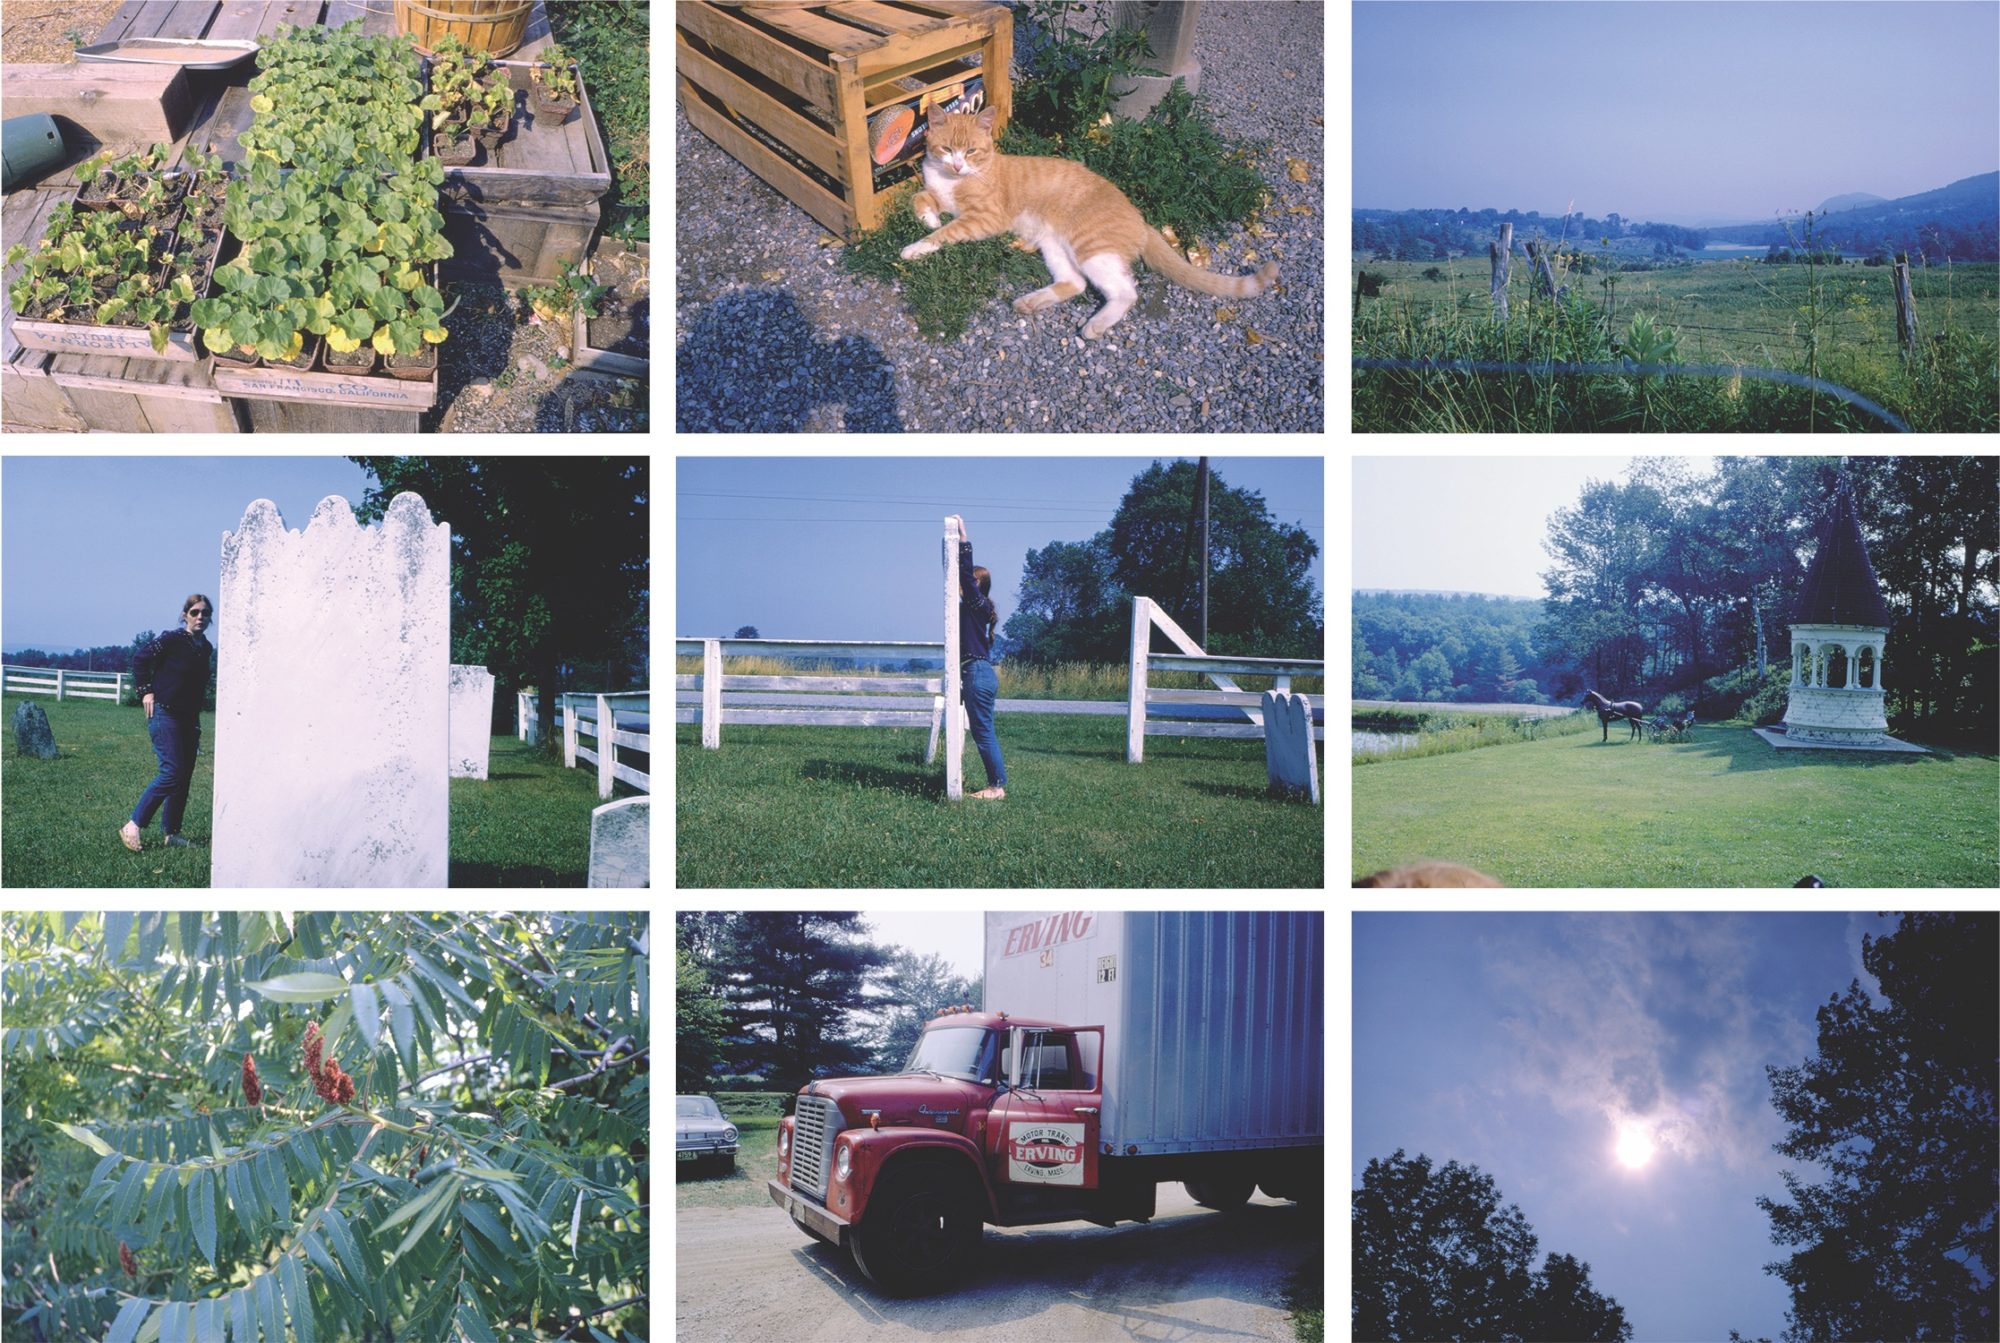 A 3 by 3 array of photographs with green and blue tones — grass and sky, little plants, trees, trucks, a light brown cat, a horse and sunlight peeking down through the clouds..